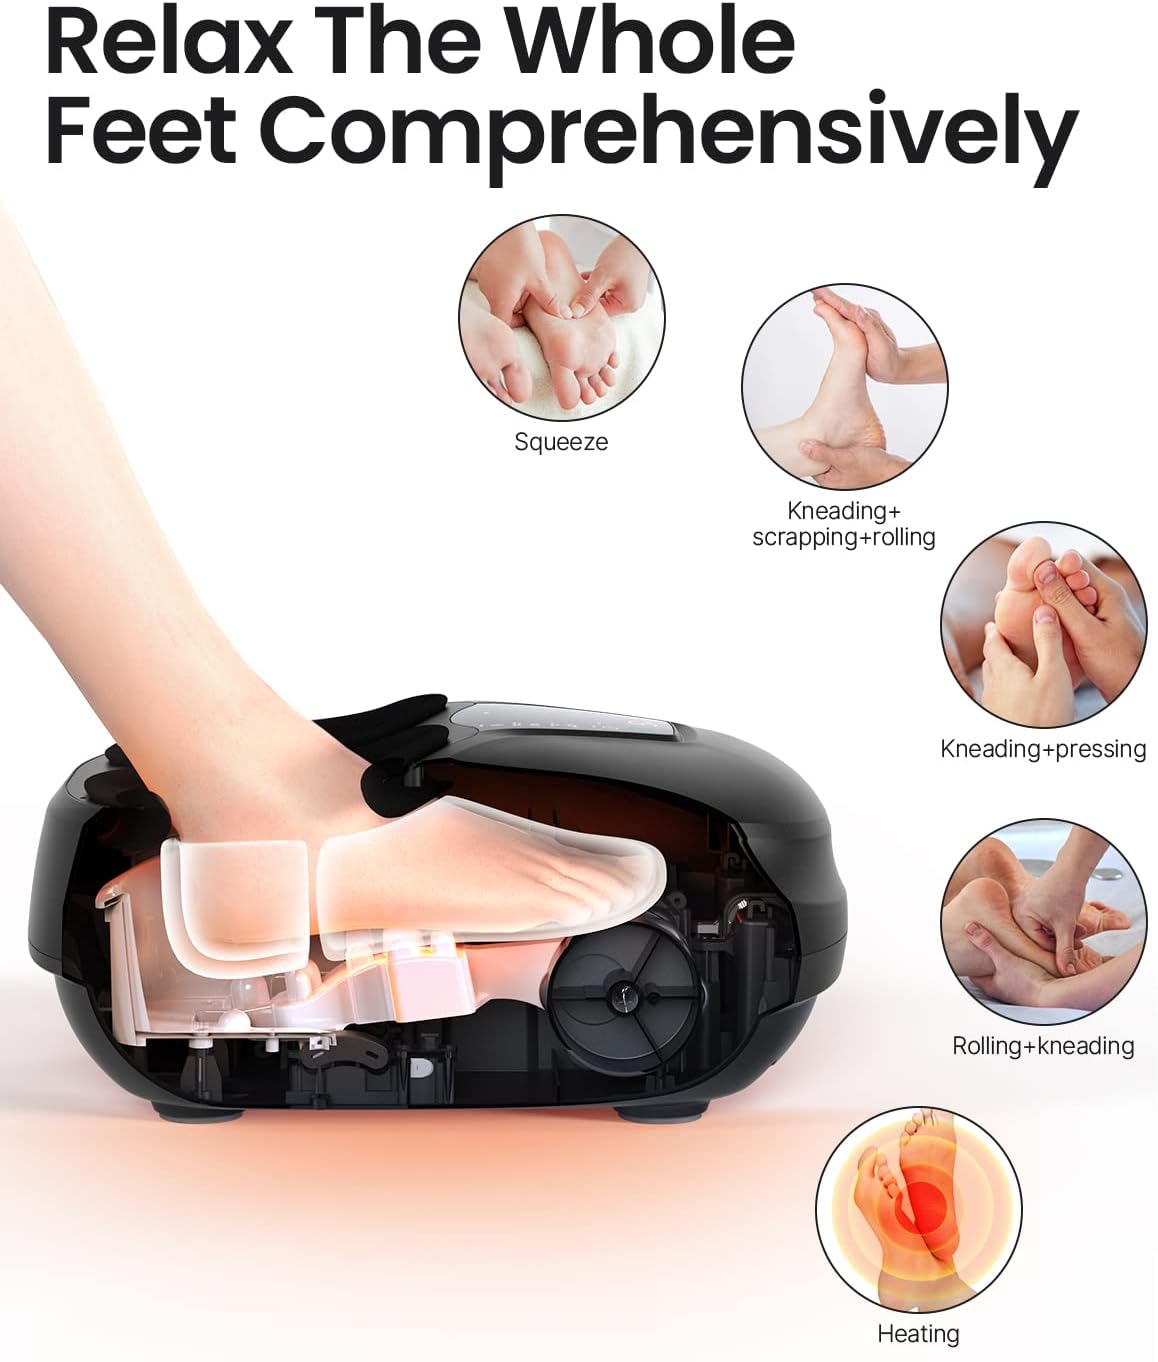 RENPHO Shiatsu Foot Massager with Heat, Compact Foot Massager Machine with Remote - $70